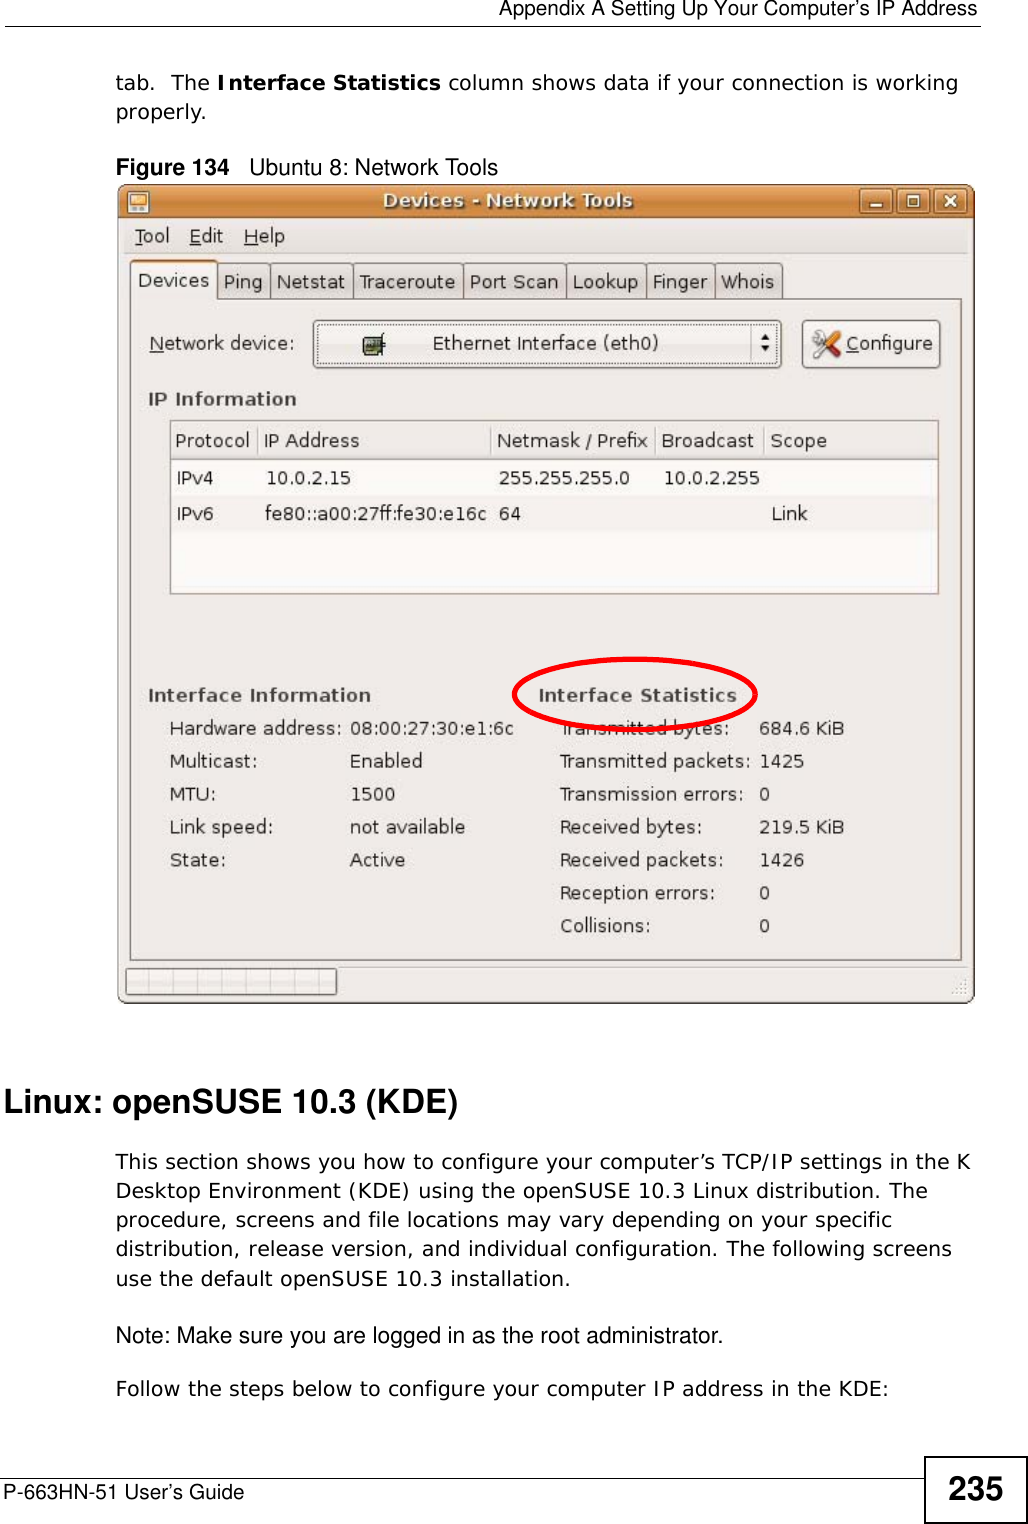  Appendix A Setting Up Your Computer’s IP AddressP-663HN-51 User’s Guide 235tab.  The Interface Statistics column shows data if your connection is working properly.Figure 134   Ubuntu 8: Network ToolsLinux: openSUSE 10.3 (KDE)This section shows you how to configure your computer’s TCP/IP settings in the K Desktop Environment (KDE) using the openSUSE 10.3 Linux distribution. The procedure, screens and file locations may vary depending on your specific distribution, release version, and individual configuration. The following screens use the default openSUSE 10.3 installation.Note: Make sure you are logged in as the root administrator. Follow the steps below to configure your computer IP address in the KDE: